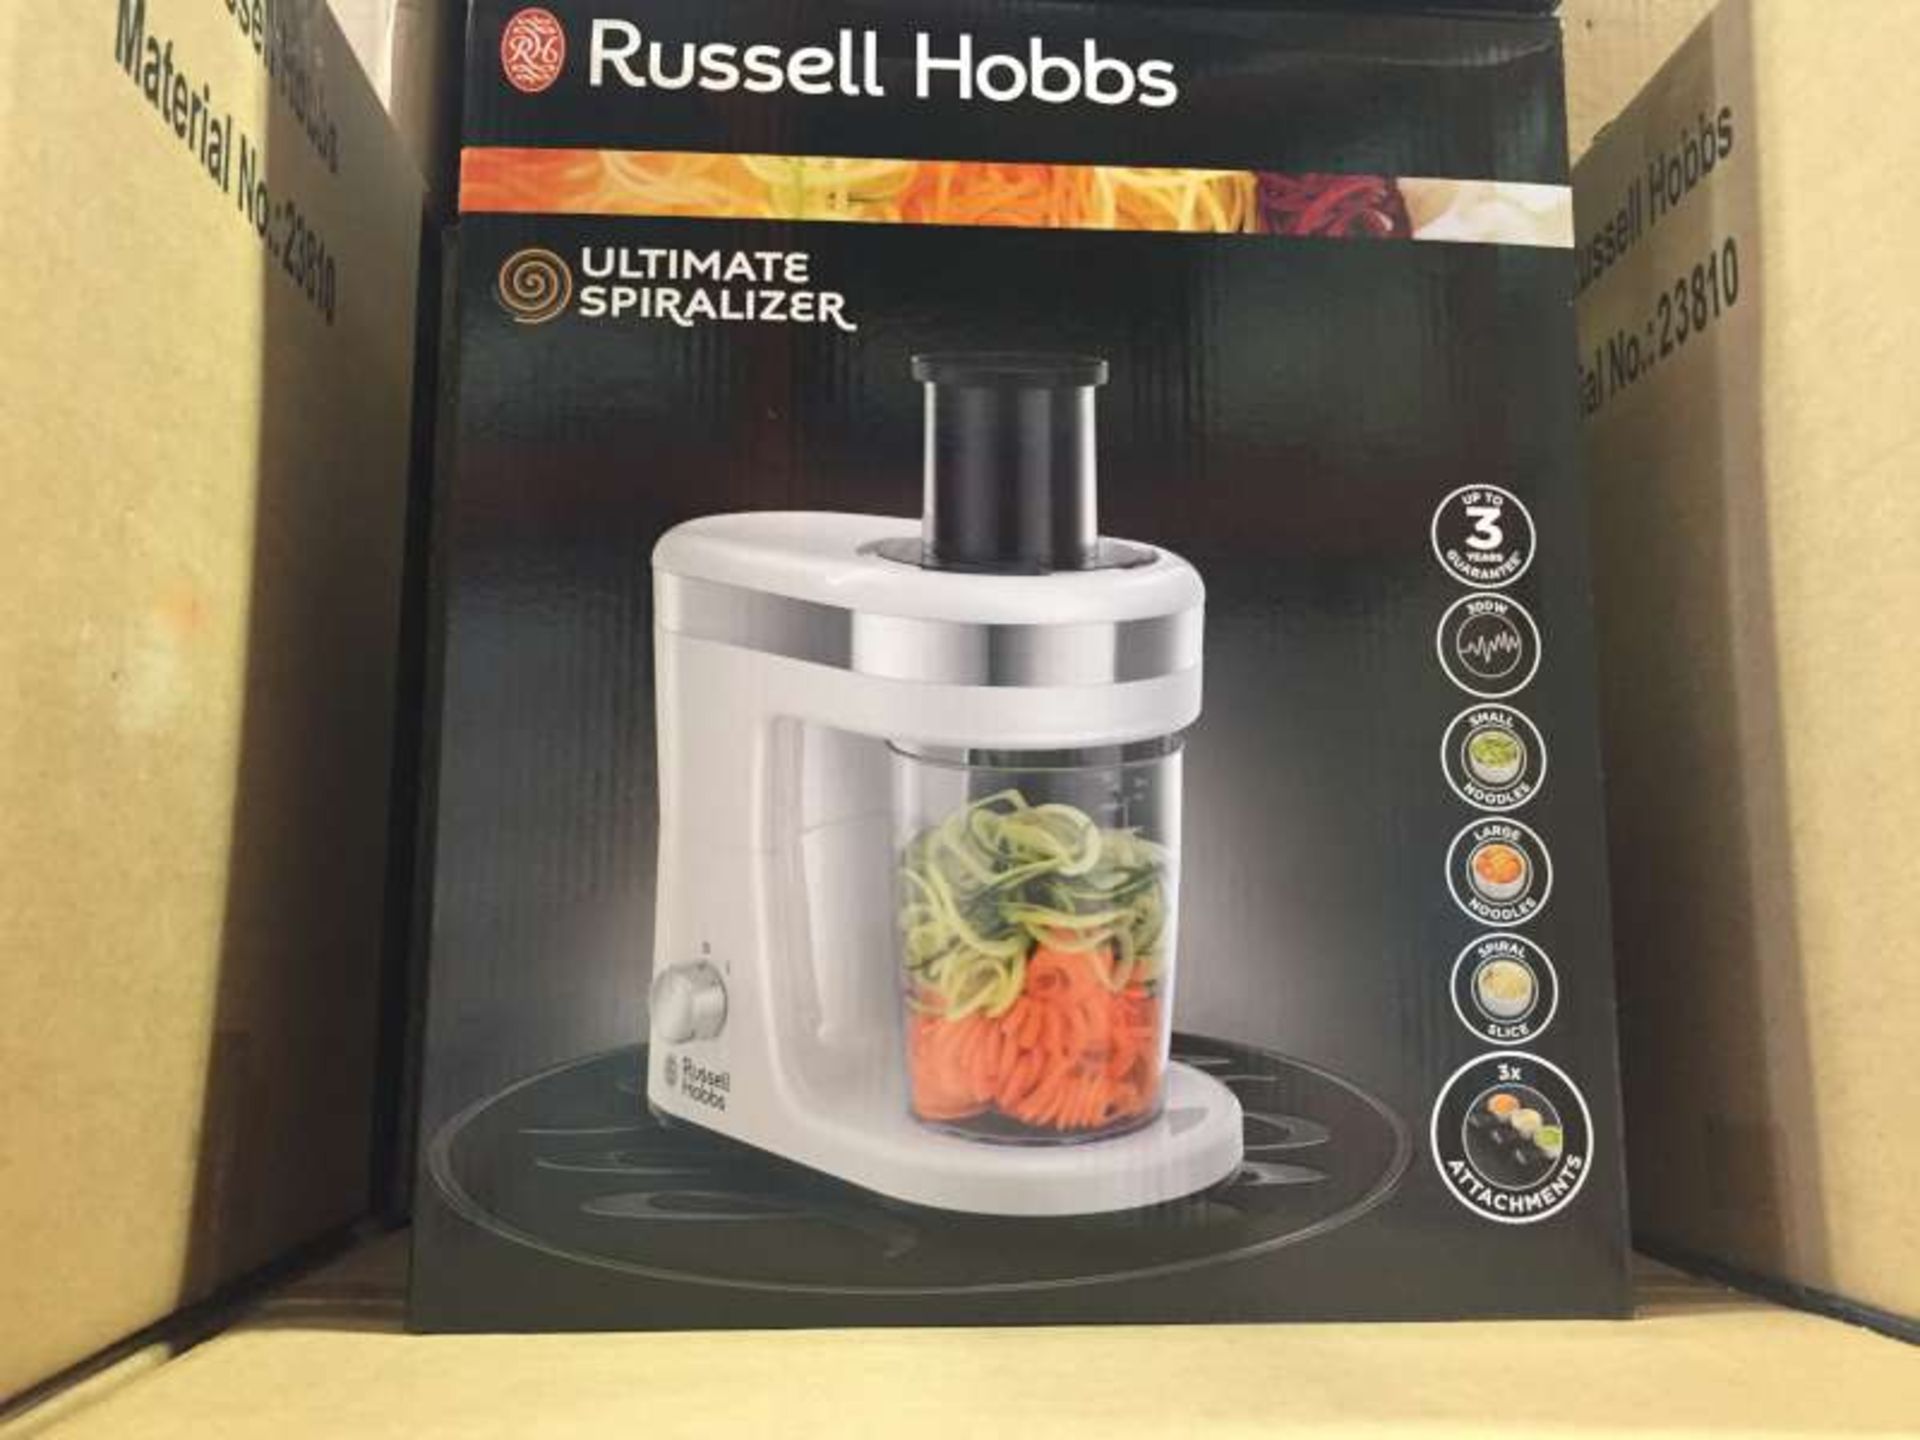 6 X RUSSELL HOBBS ULTIMATE SPIRALIZERS IN 3 BOXES